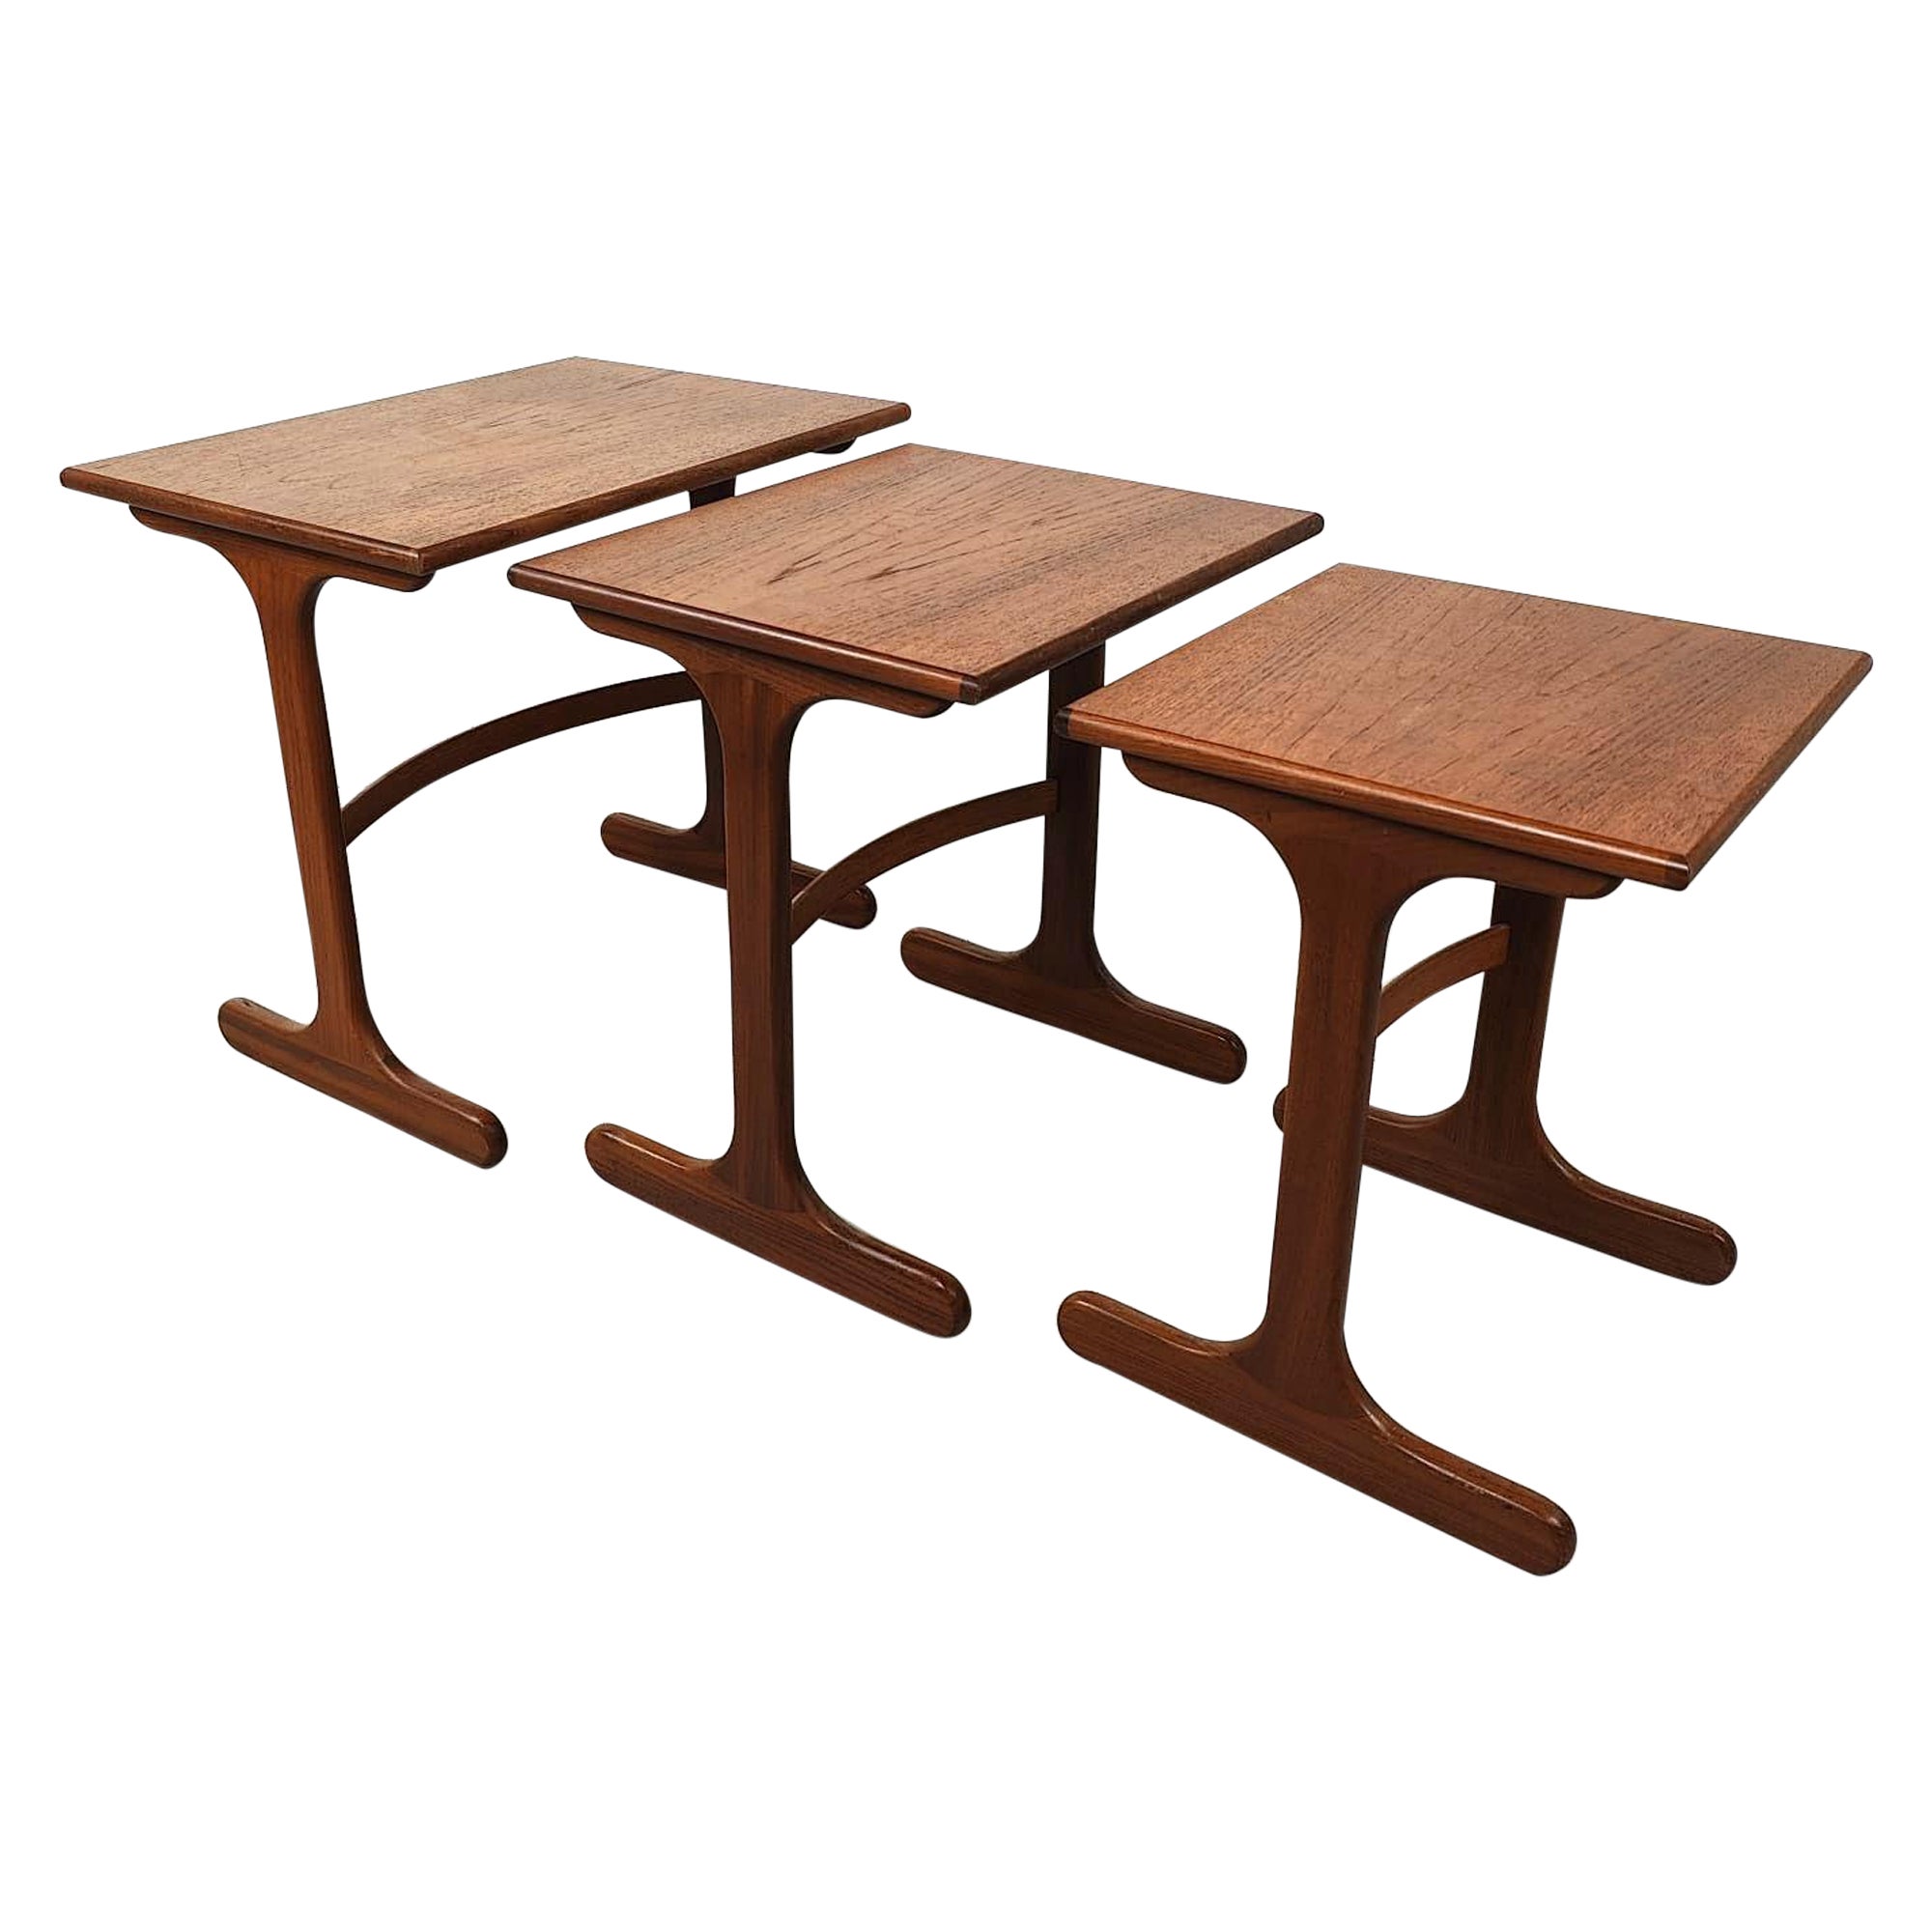 G-Plan Nesting Tables and Stacking Tables